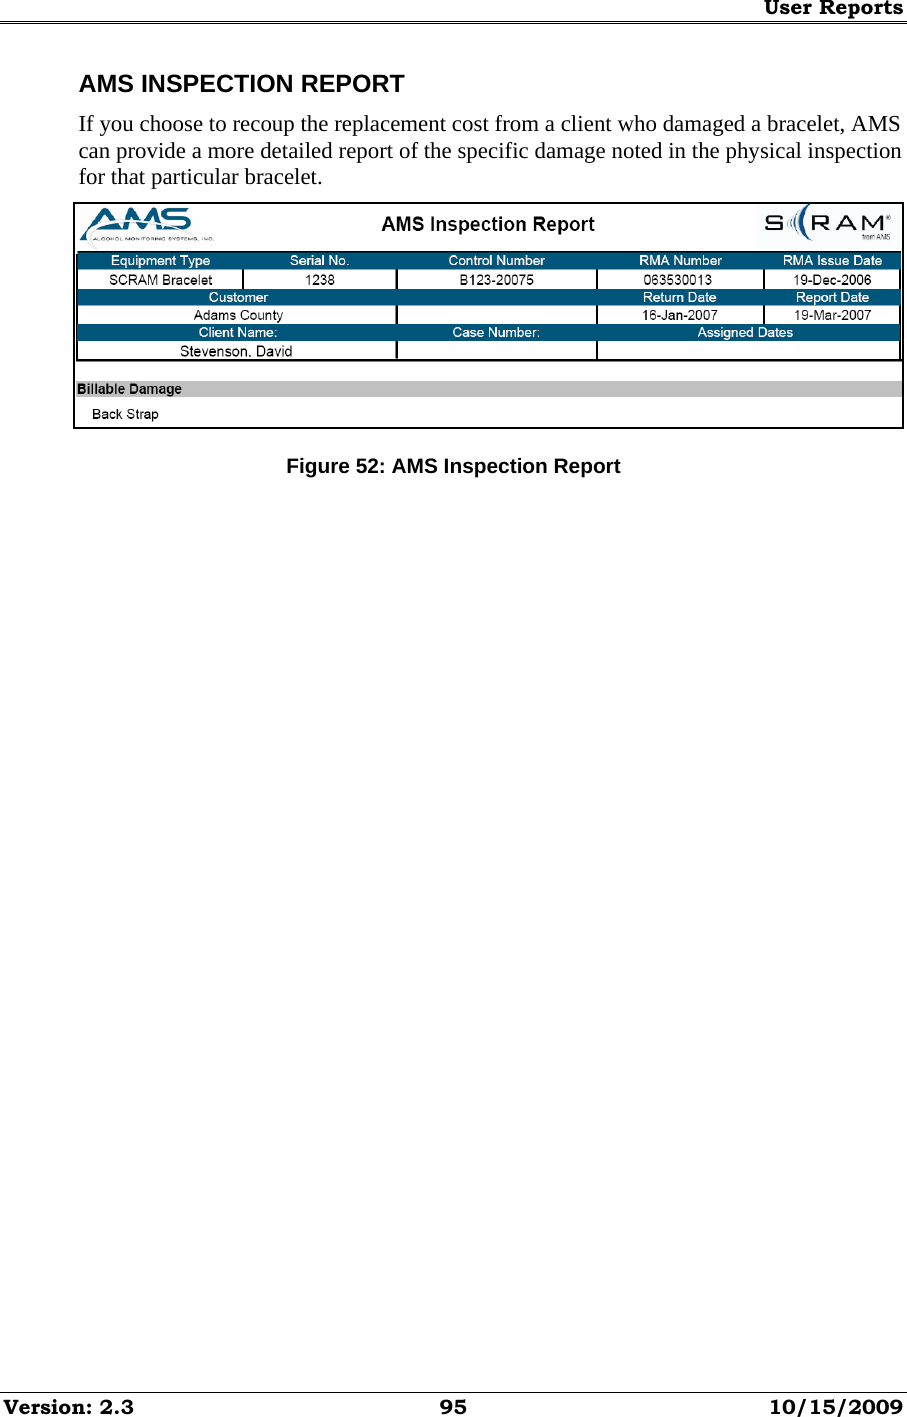 User Reports Version: 2.3  95  10/15/2009 AMS INSPECTION REPORT If you choose to recoup the replacement cost from a client who damaged a bracelet, AMS can provide a more detailed report of the specific damage noted in the physical inspection for that particular bracelet.  Figure 52: AMS Inspection Report   